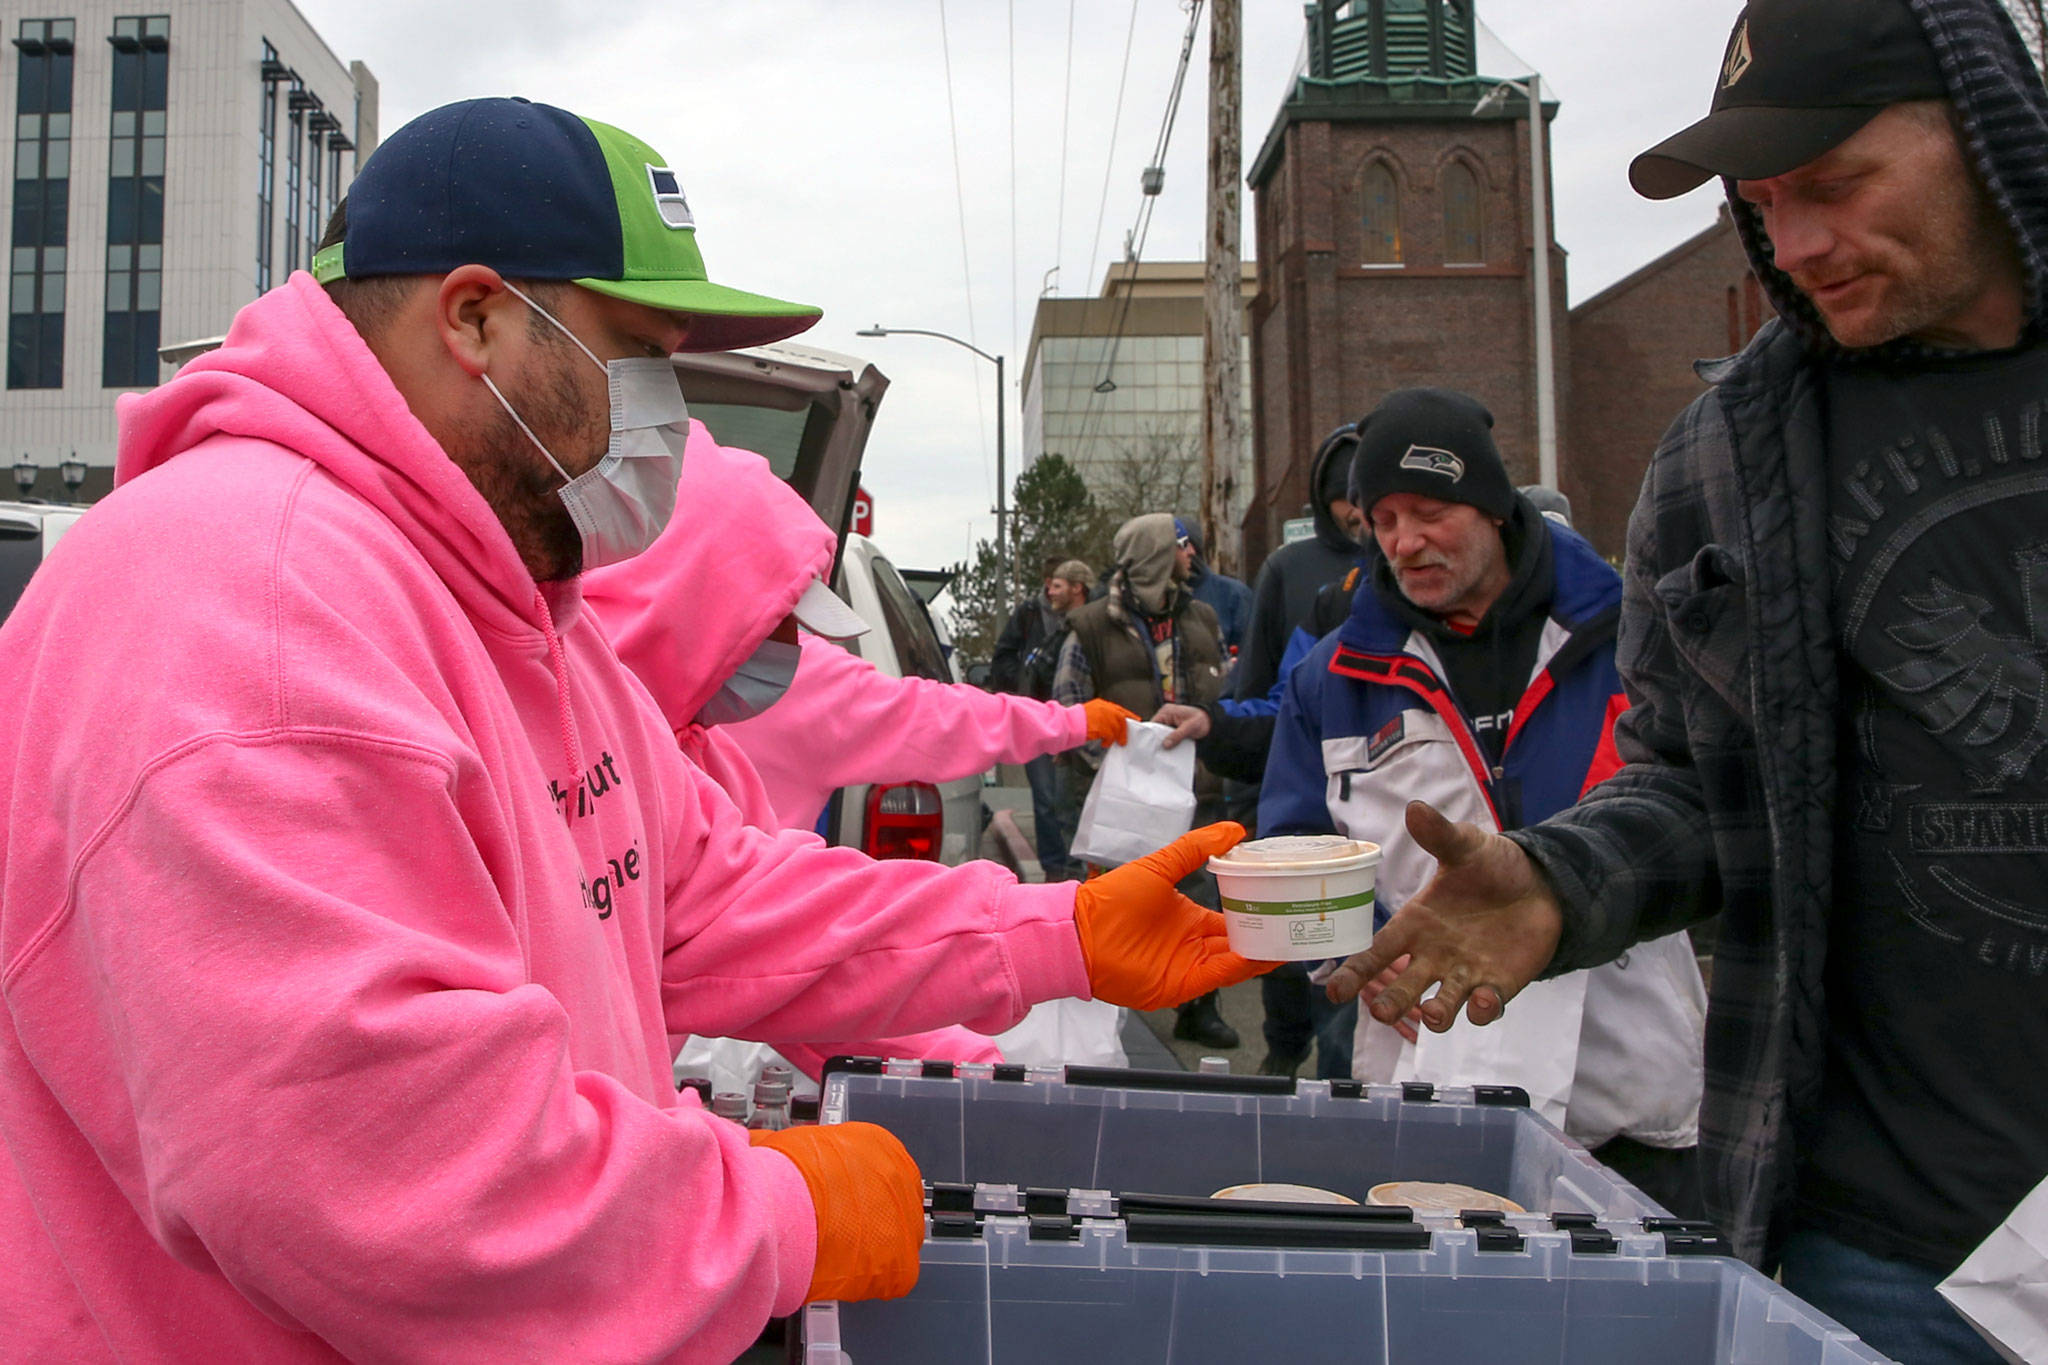 Members of the The Hand Up Project distribute meals in downtown Everett Thursday afternoon. (Kevin Clark / The Herald)